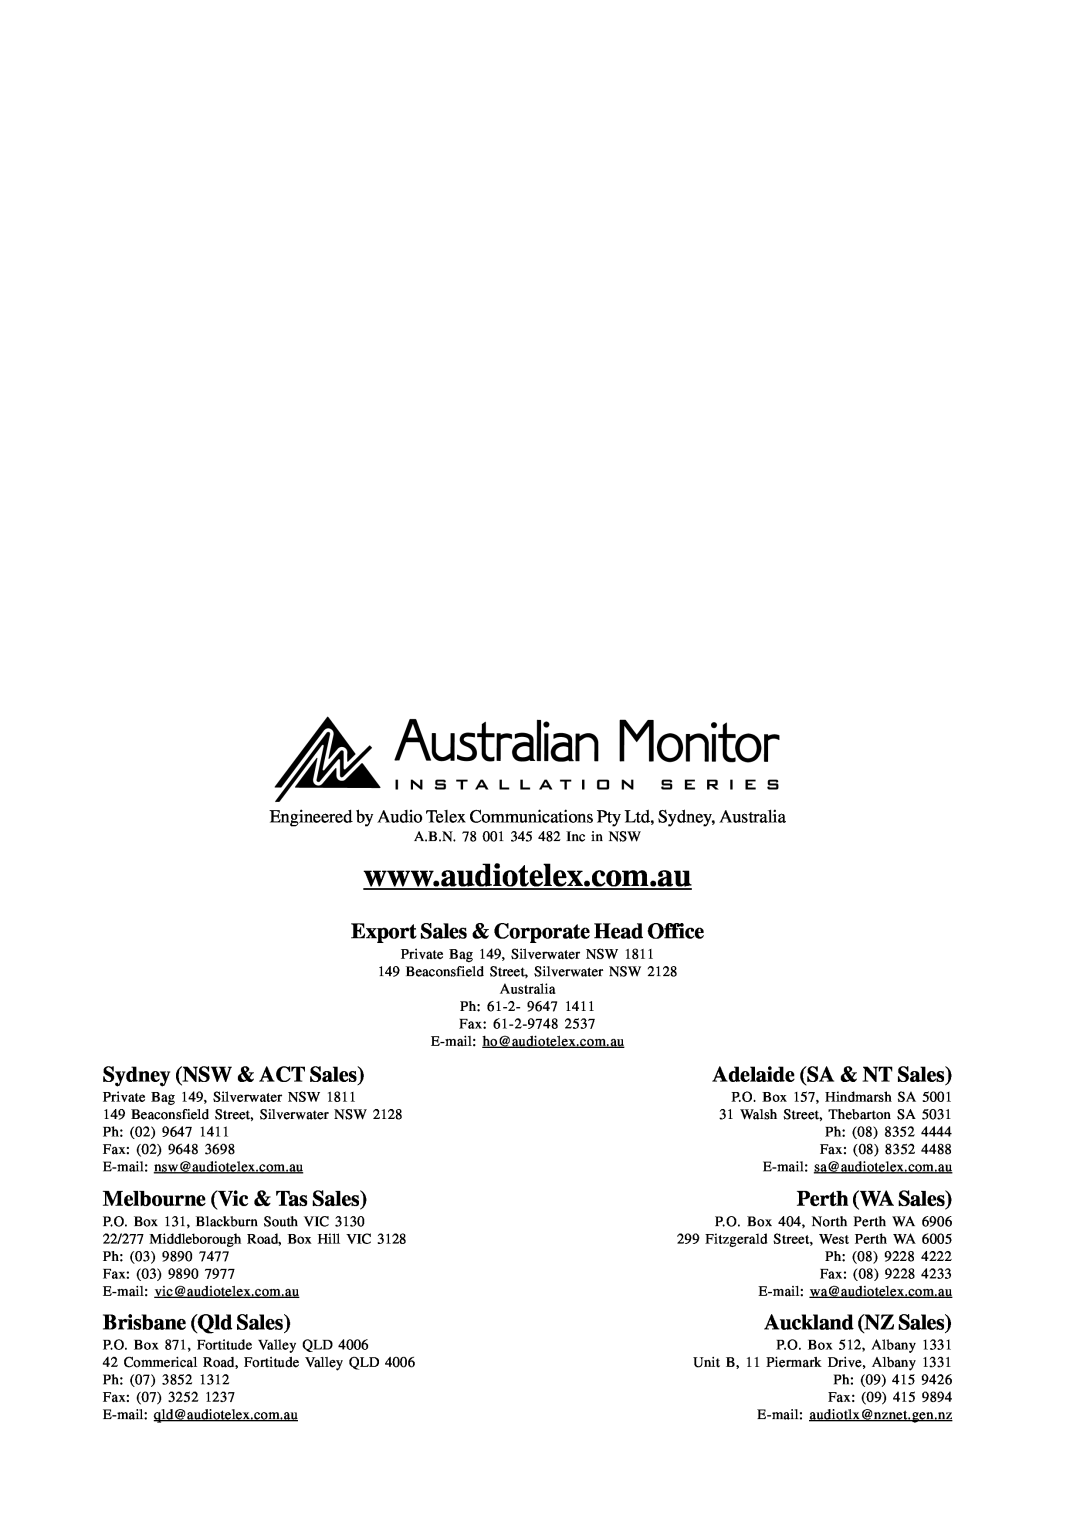 Telex ACM1202P manual Export Sales & Corporate Head Office, Sydney NSW & ACT Sales, Adelaide SA & NT Sales, Perth WA Sales 